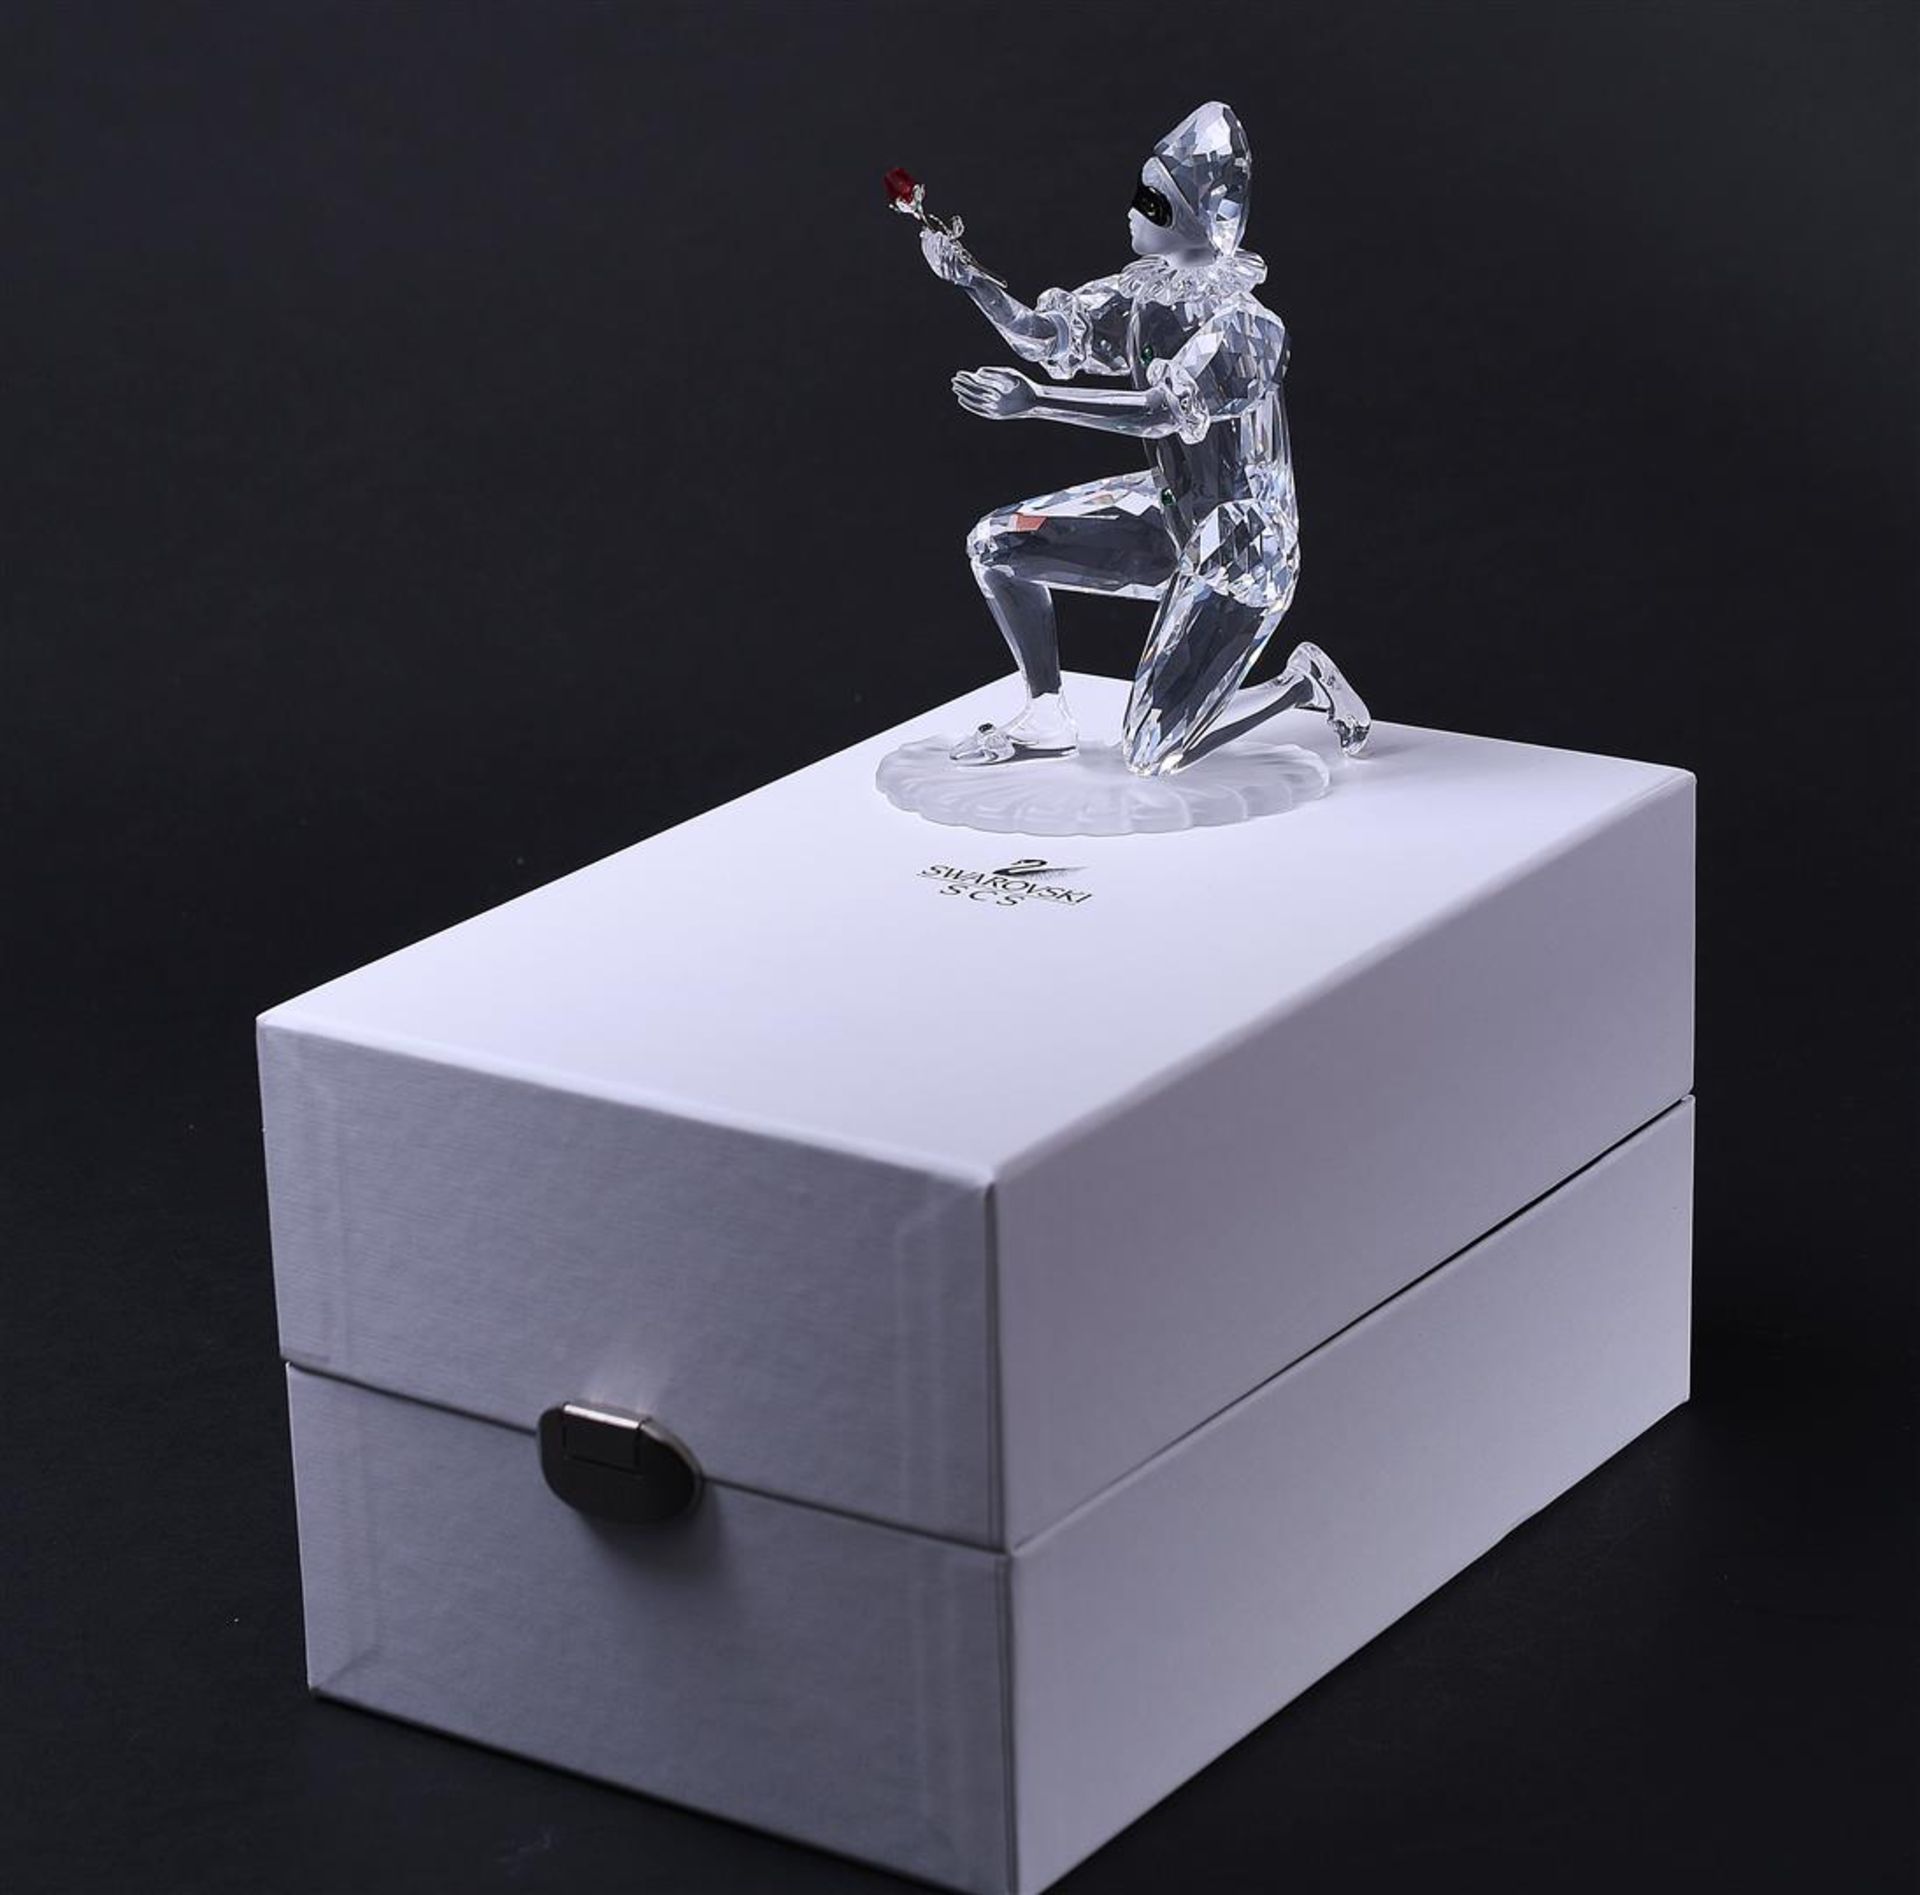 Swarovski SCS, annual edition 2001 harlequin, Year of issue 2001, 254044. Includes original box.
H.  - Image 7 of 7